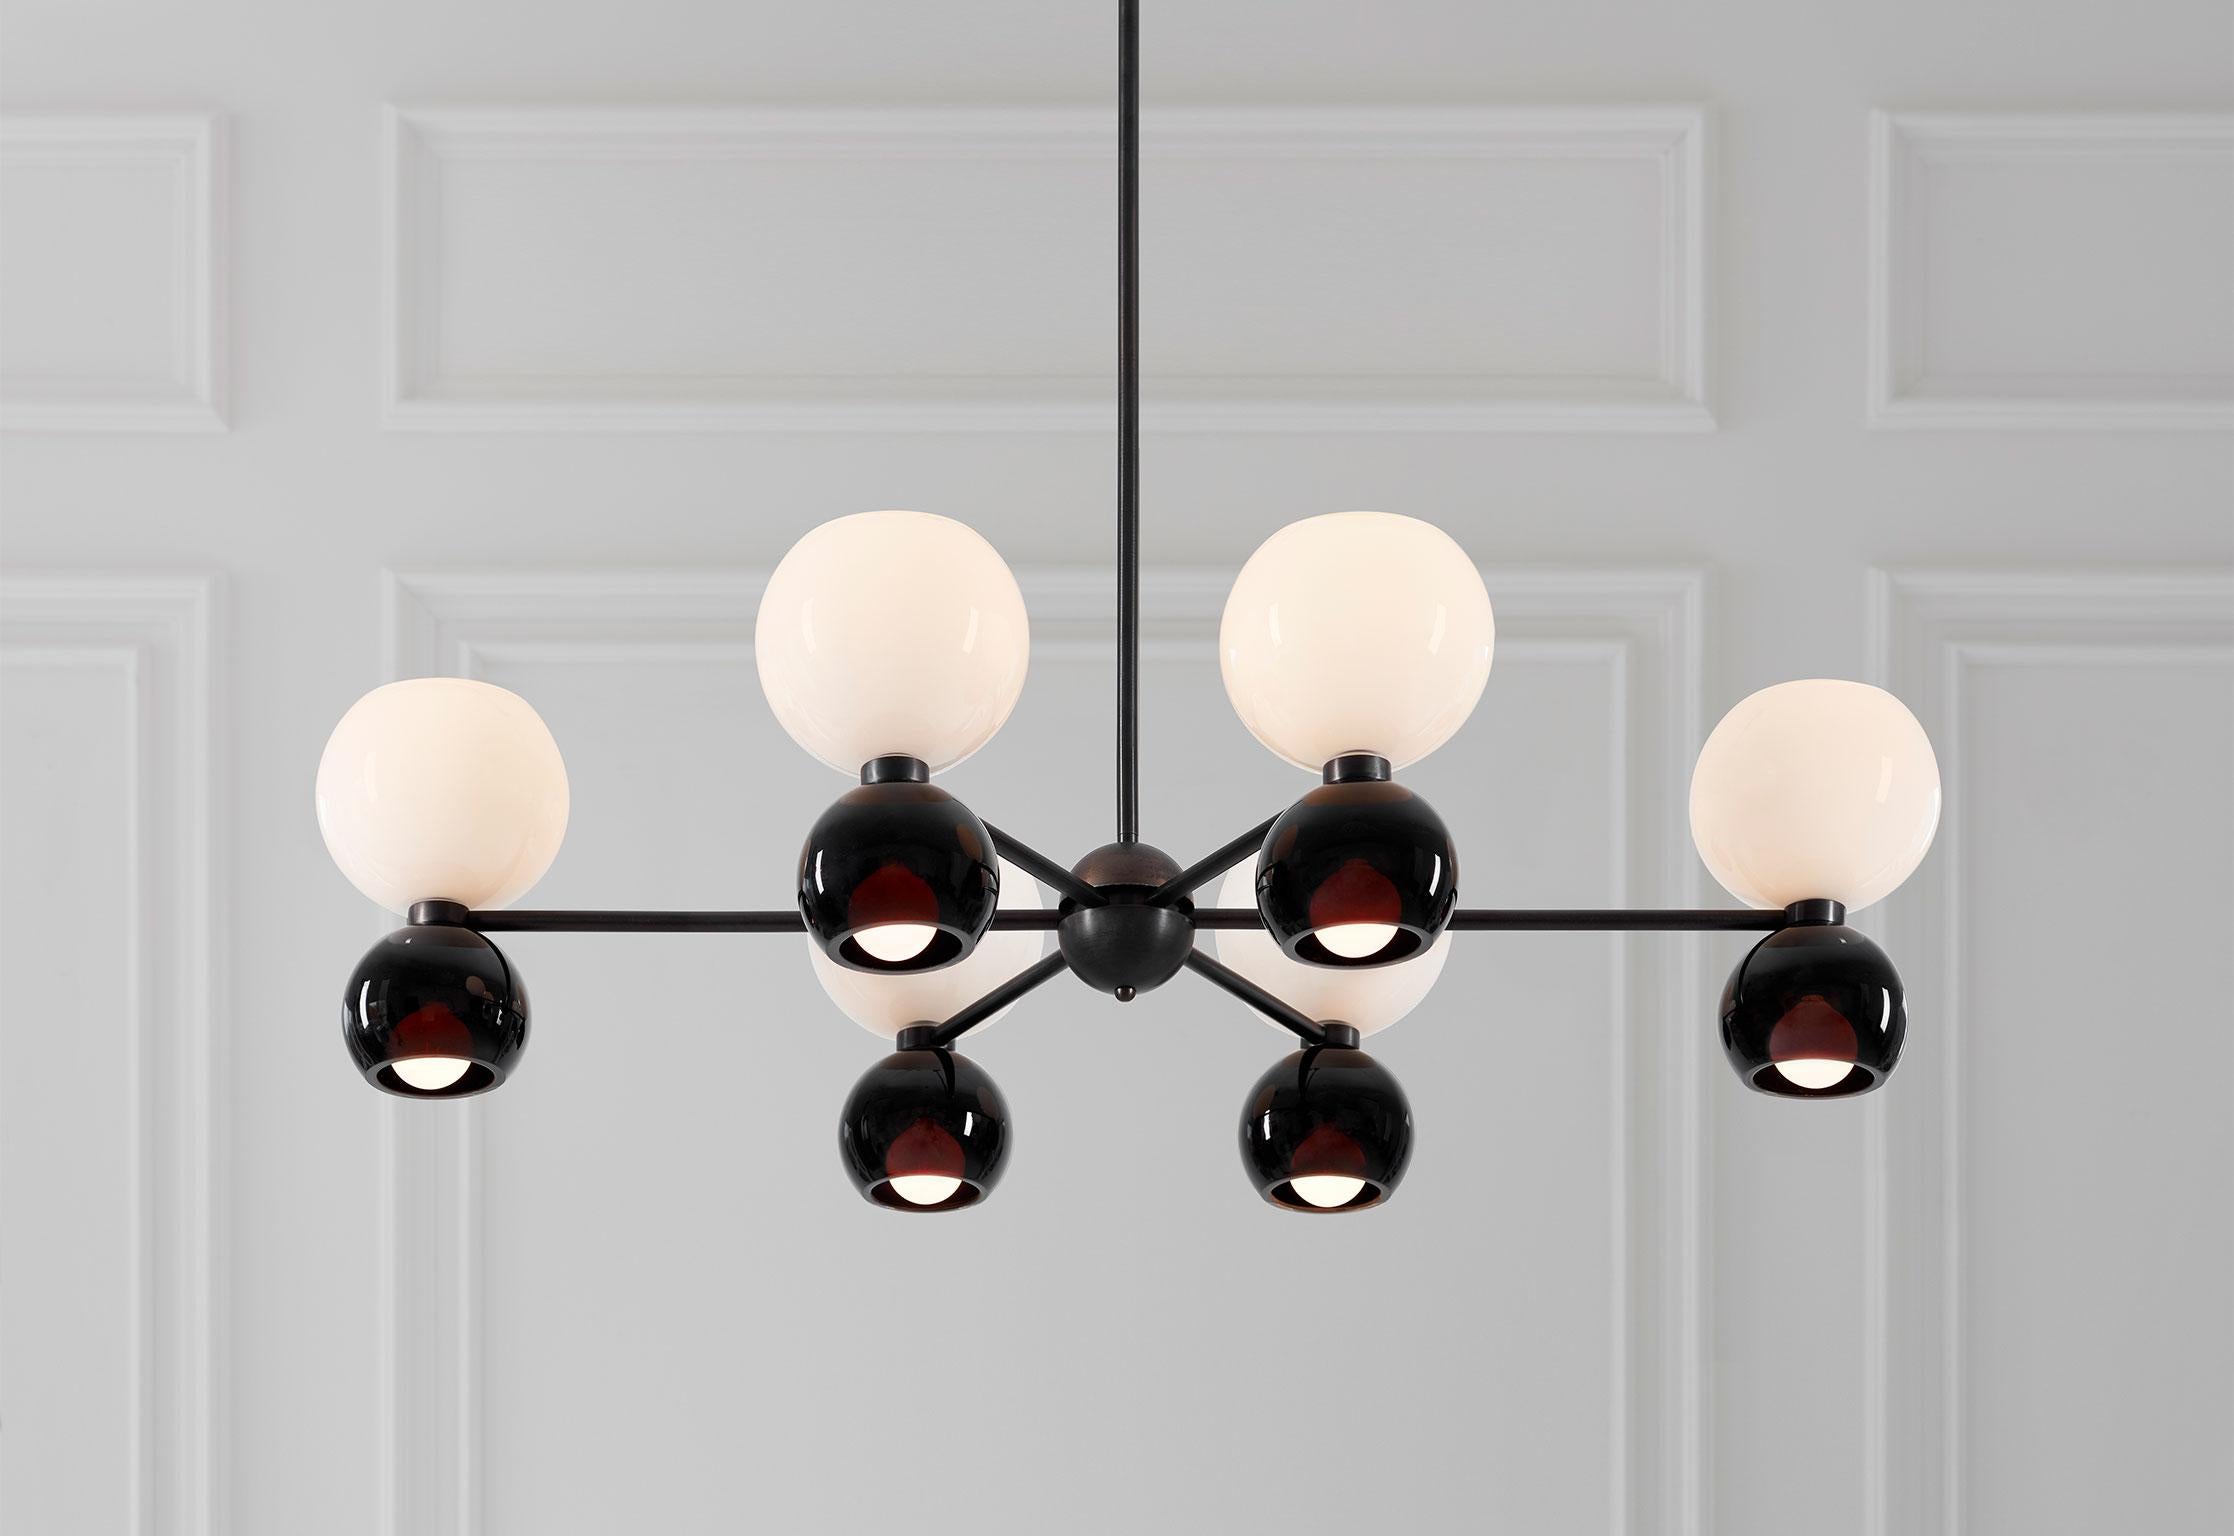 Going formal in black and white, the Betty Oval Chandelier showcases luminous hand blown glass. Classic Midcentury forms are homage to the era of Italian designed chandeliers.

The Betty oval chandelier is complimentary to the Betty Sconce.